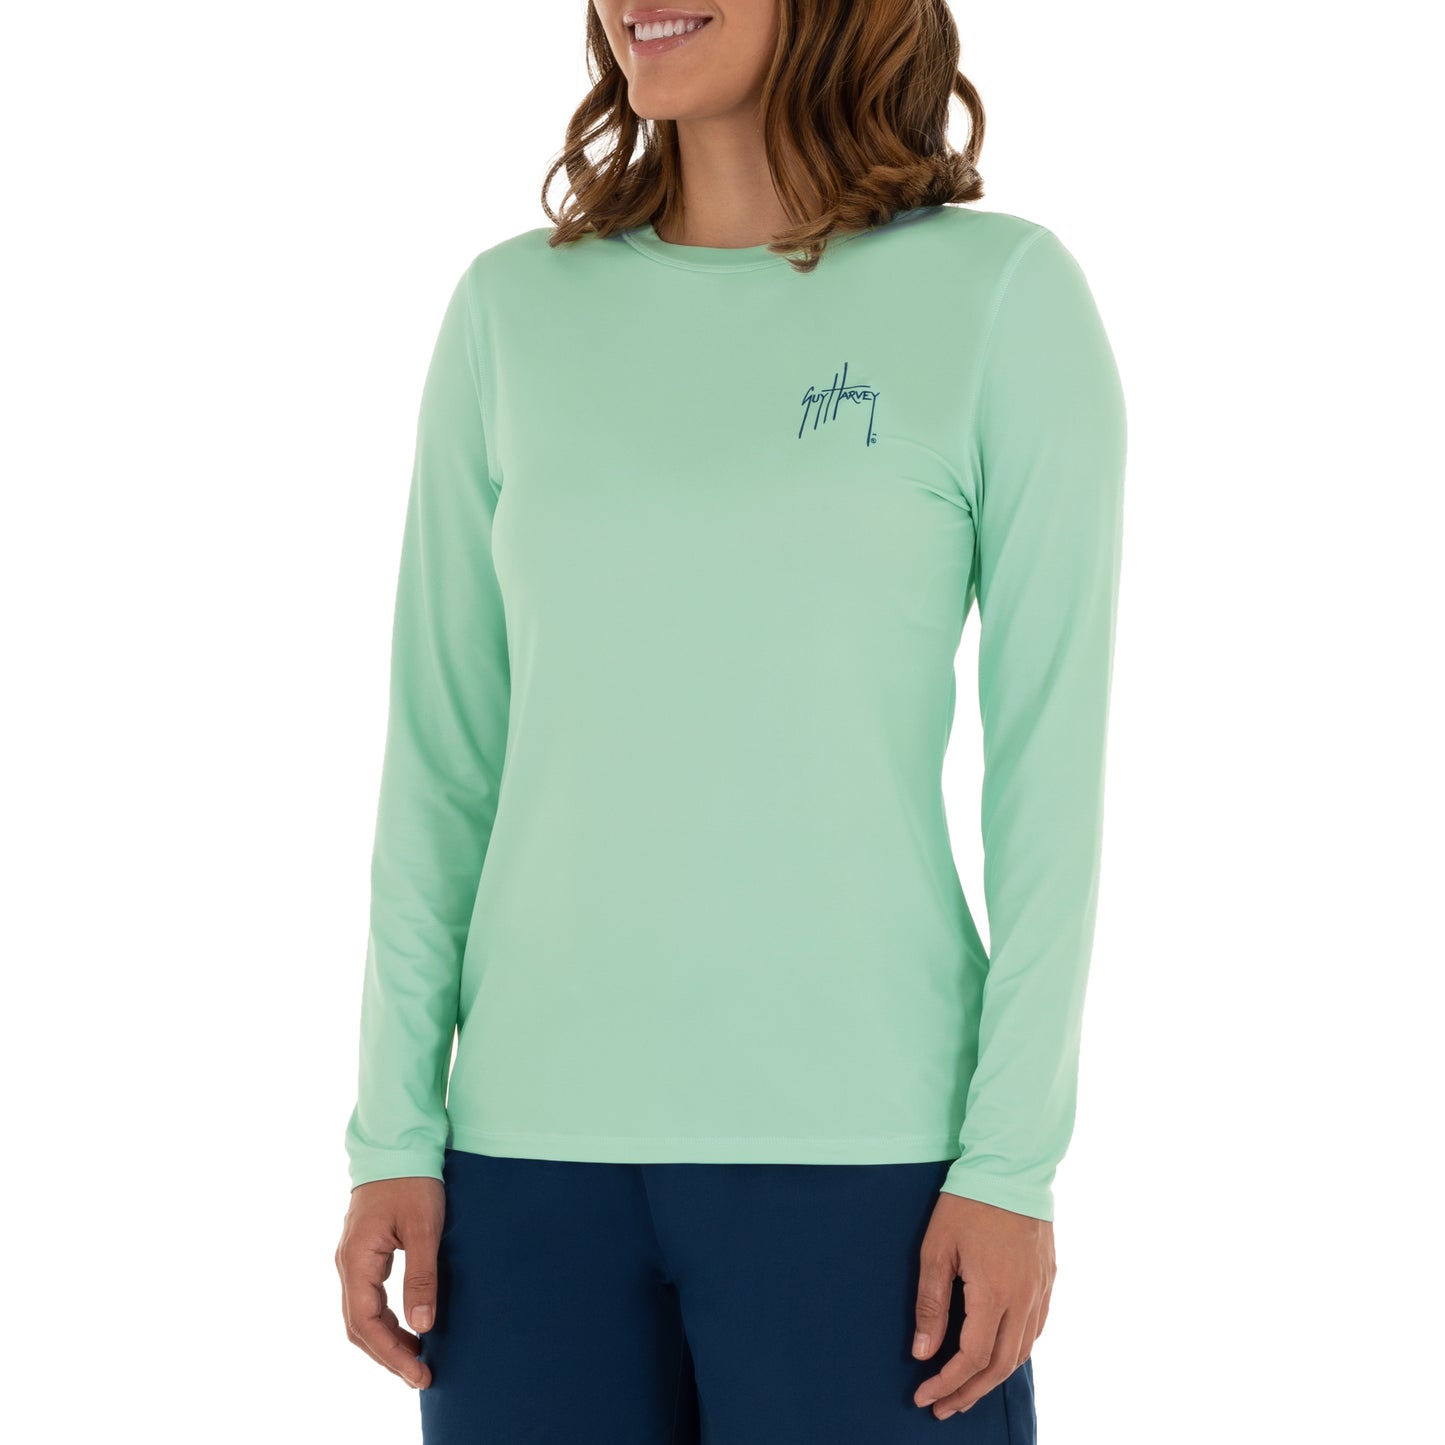 Ladies Lure Americana Long Sleeve Green Sun Protection Top View 2